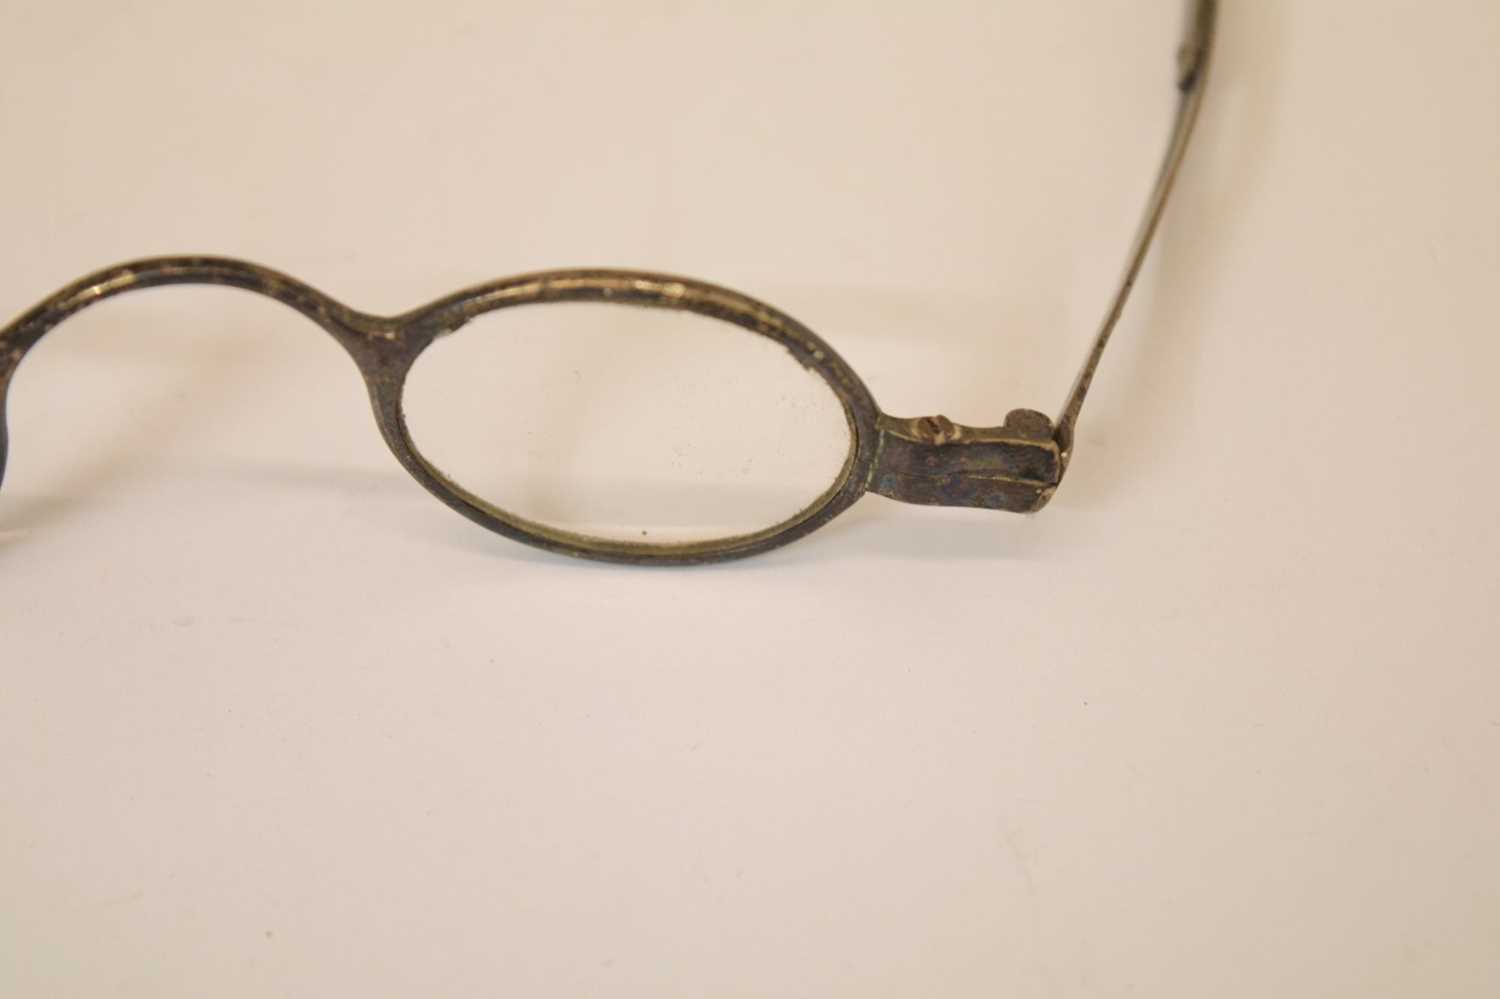 Pair of George III silver-mounted spectacles - Image 6 of 8